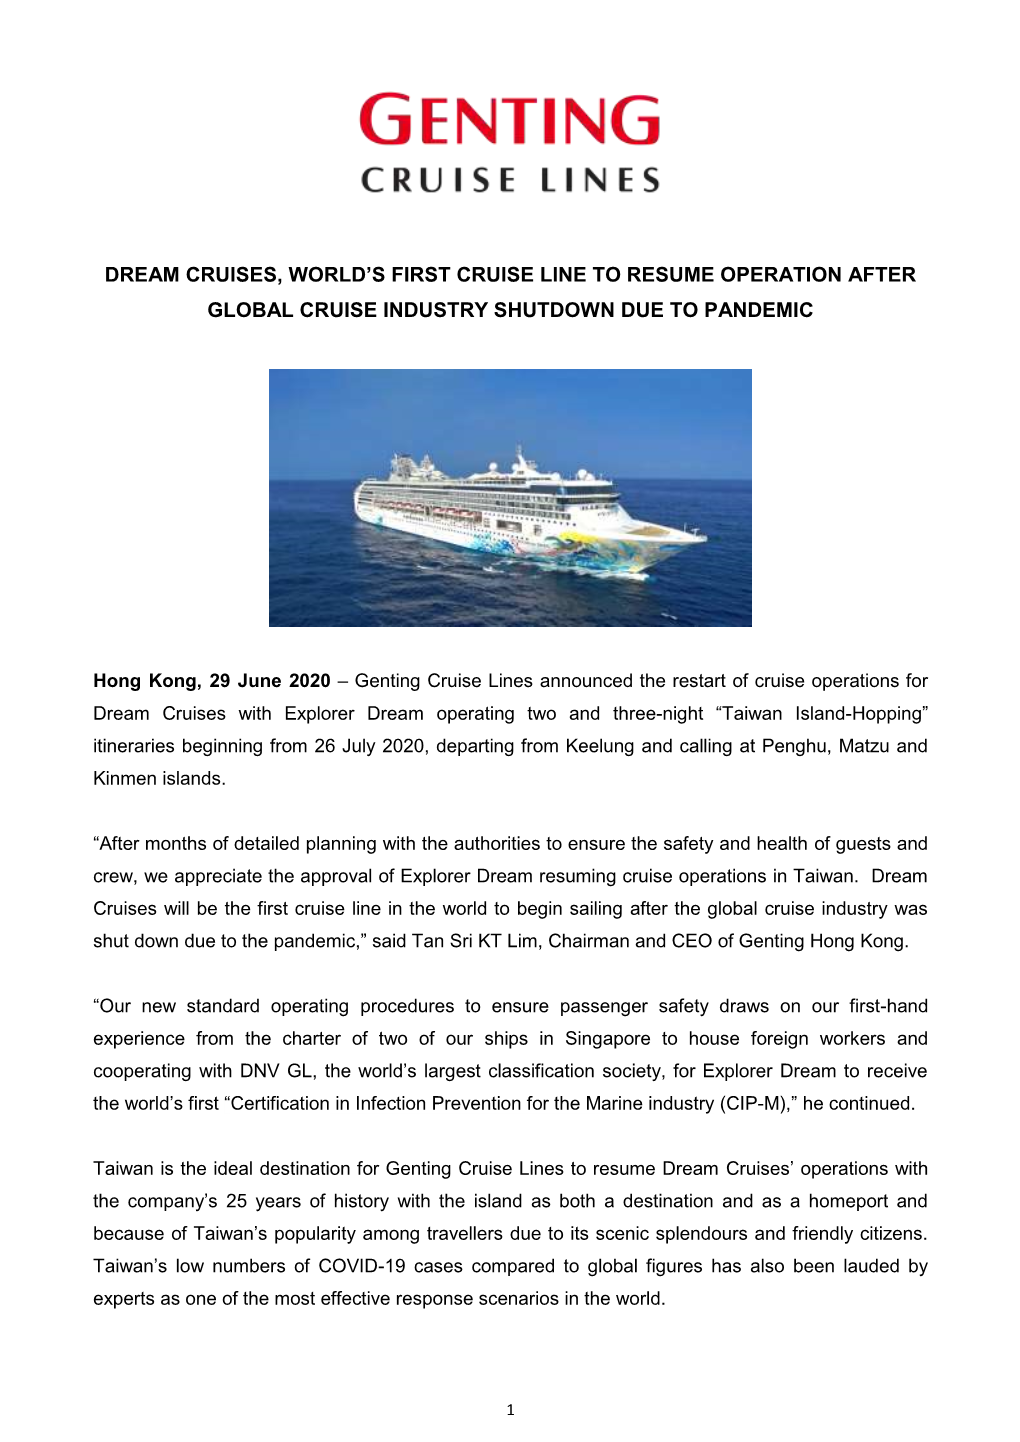 Dream Cruises Welcomes Its First